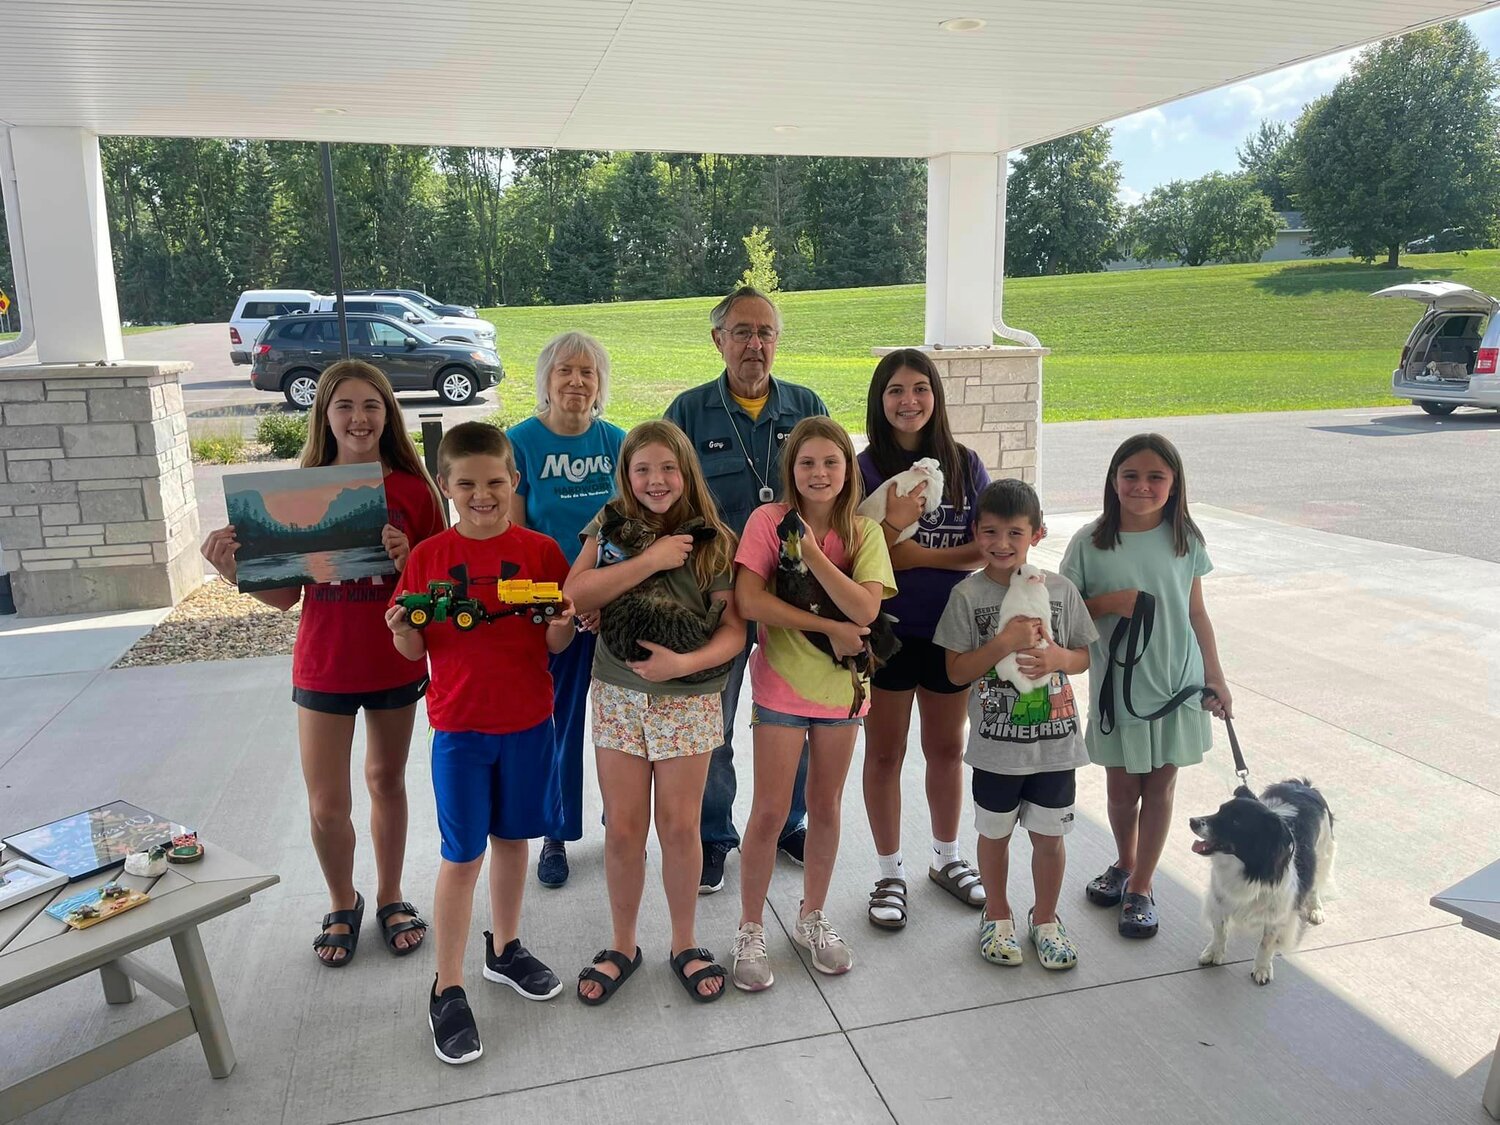 Following the Goodhue County fair, 4-H kids created a petting zoo and shared their other projects with the Goodhue Living residents.